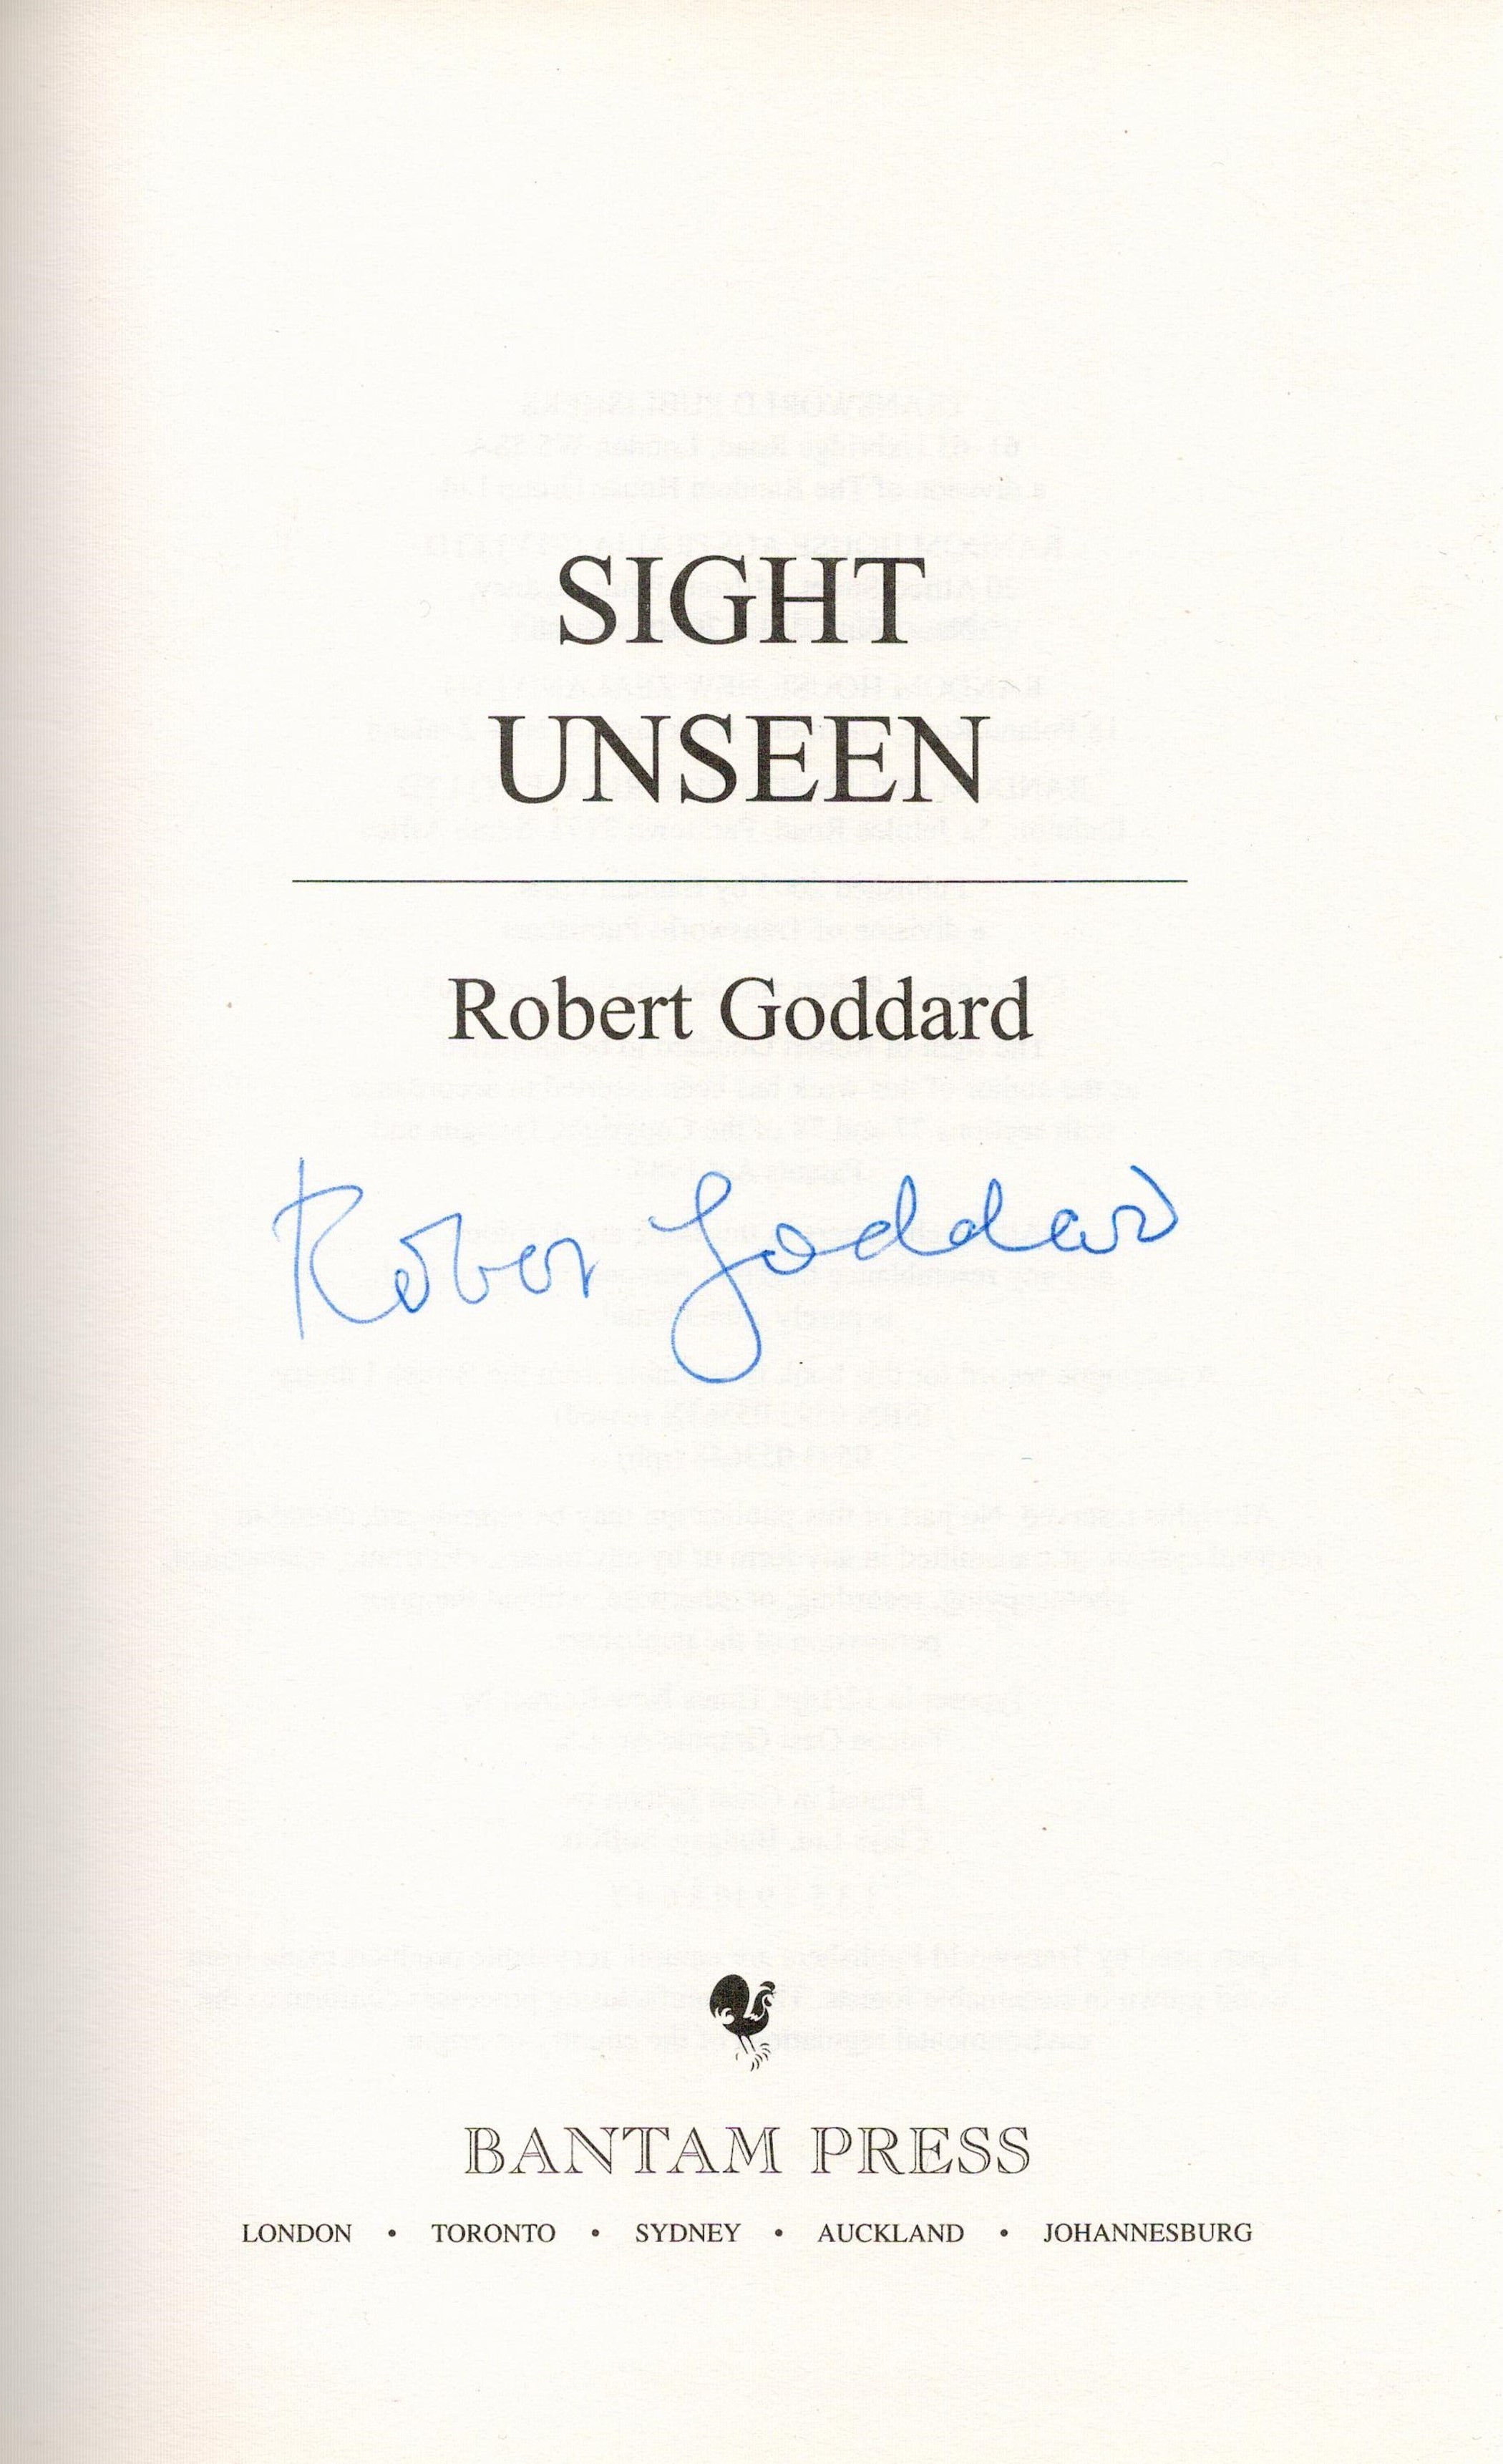 Signed Book Robert Goddard Sight Unseen 2005 First Edition Hardback Book Signed by Robert Goddard on - Image 2 of 3